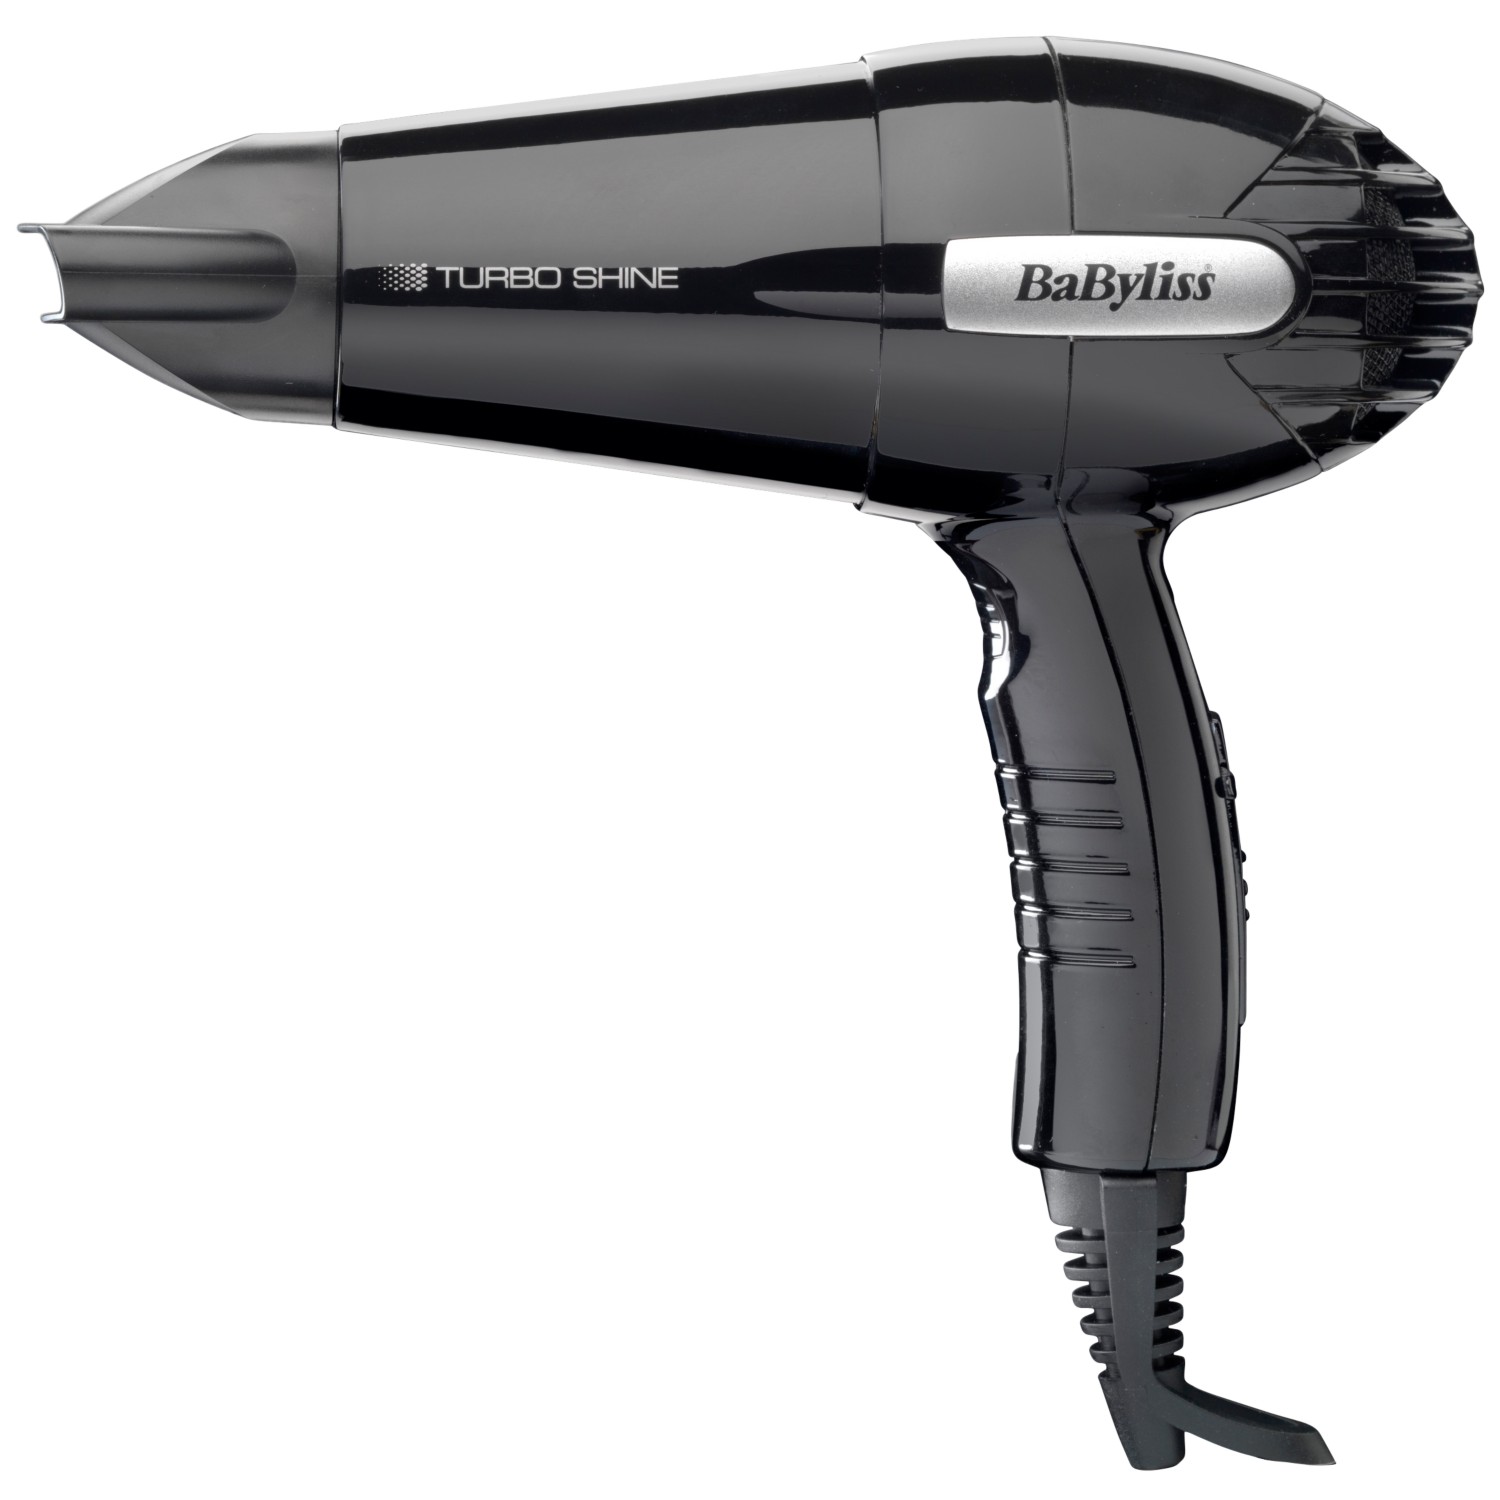 Compare Hairdryers Prices. Read reviews, compare prices and buy online